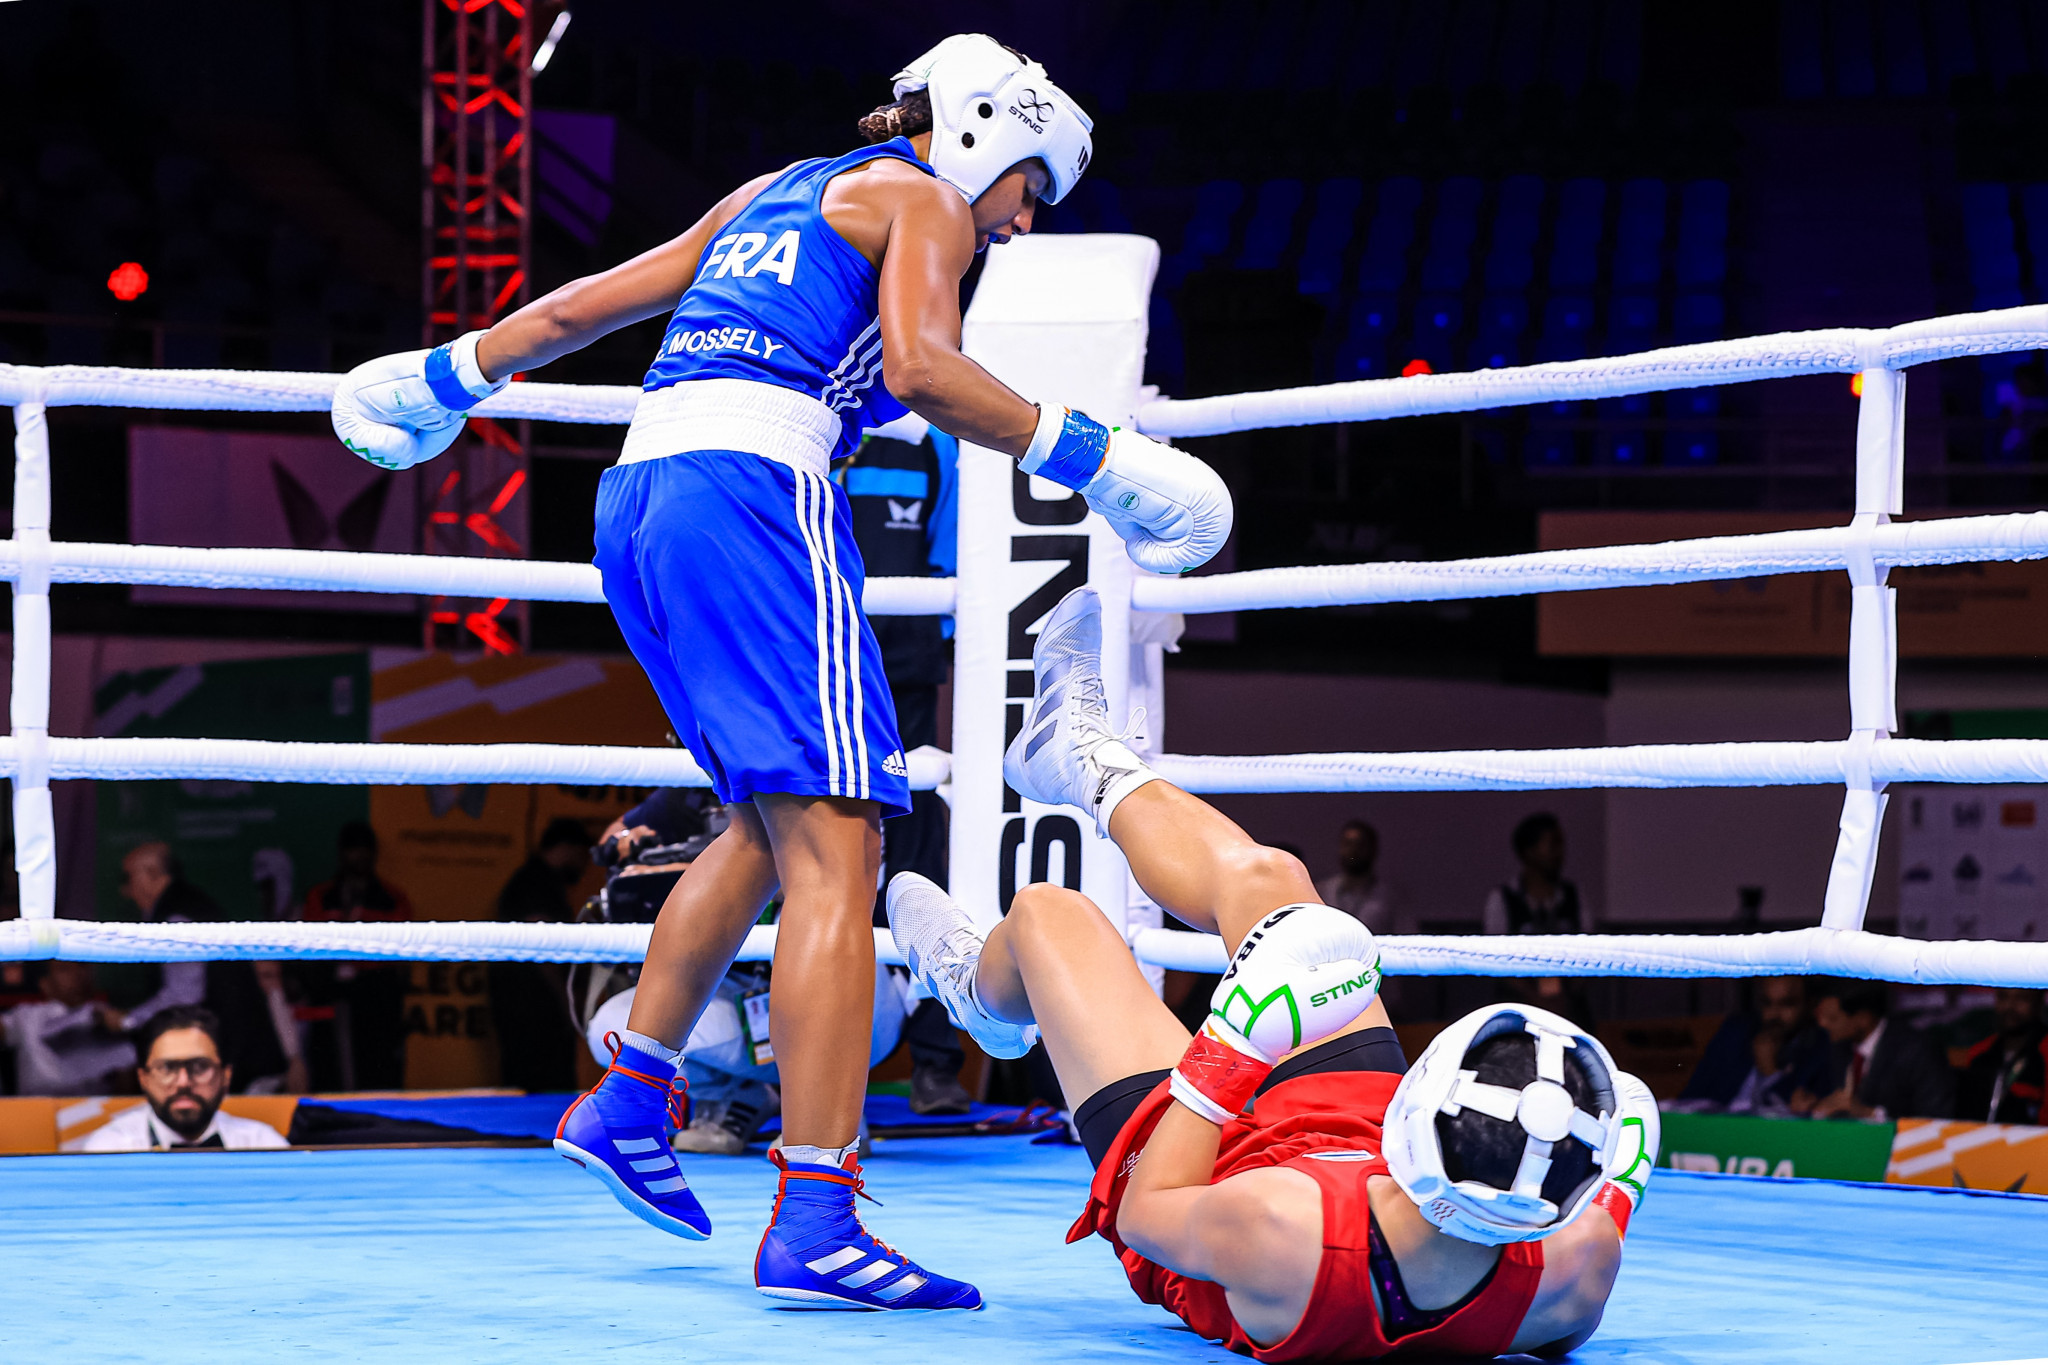 Thailand's Porntip Buapa takes a tumble as France's Olympic champion Estelle Mossely marked her return to amateur action with victory ©IBA